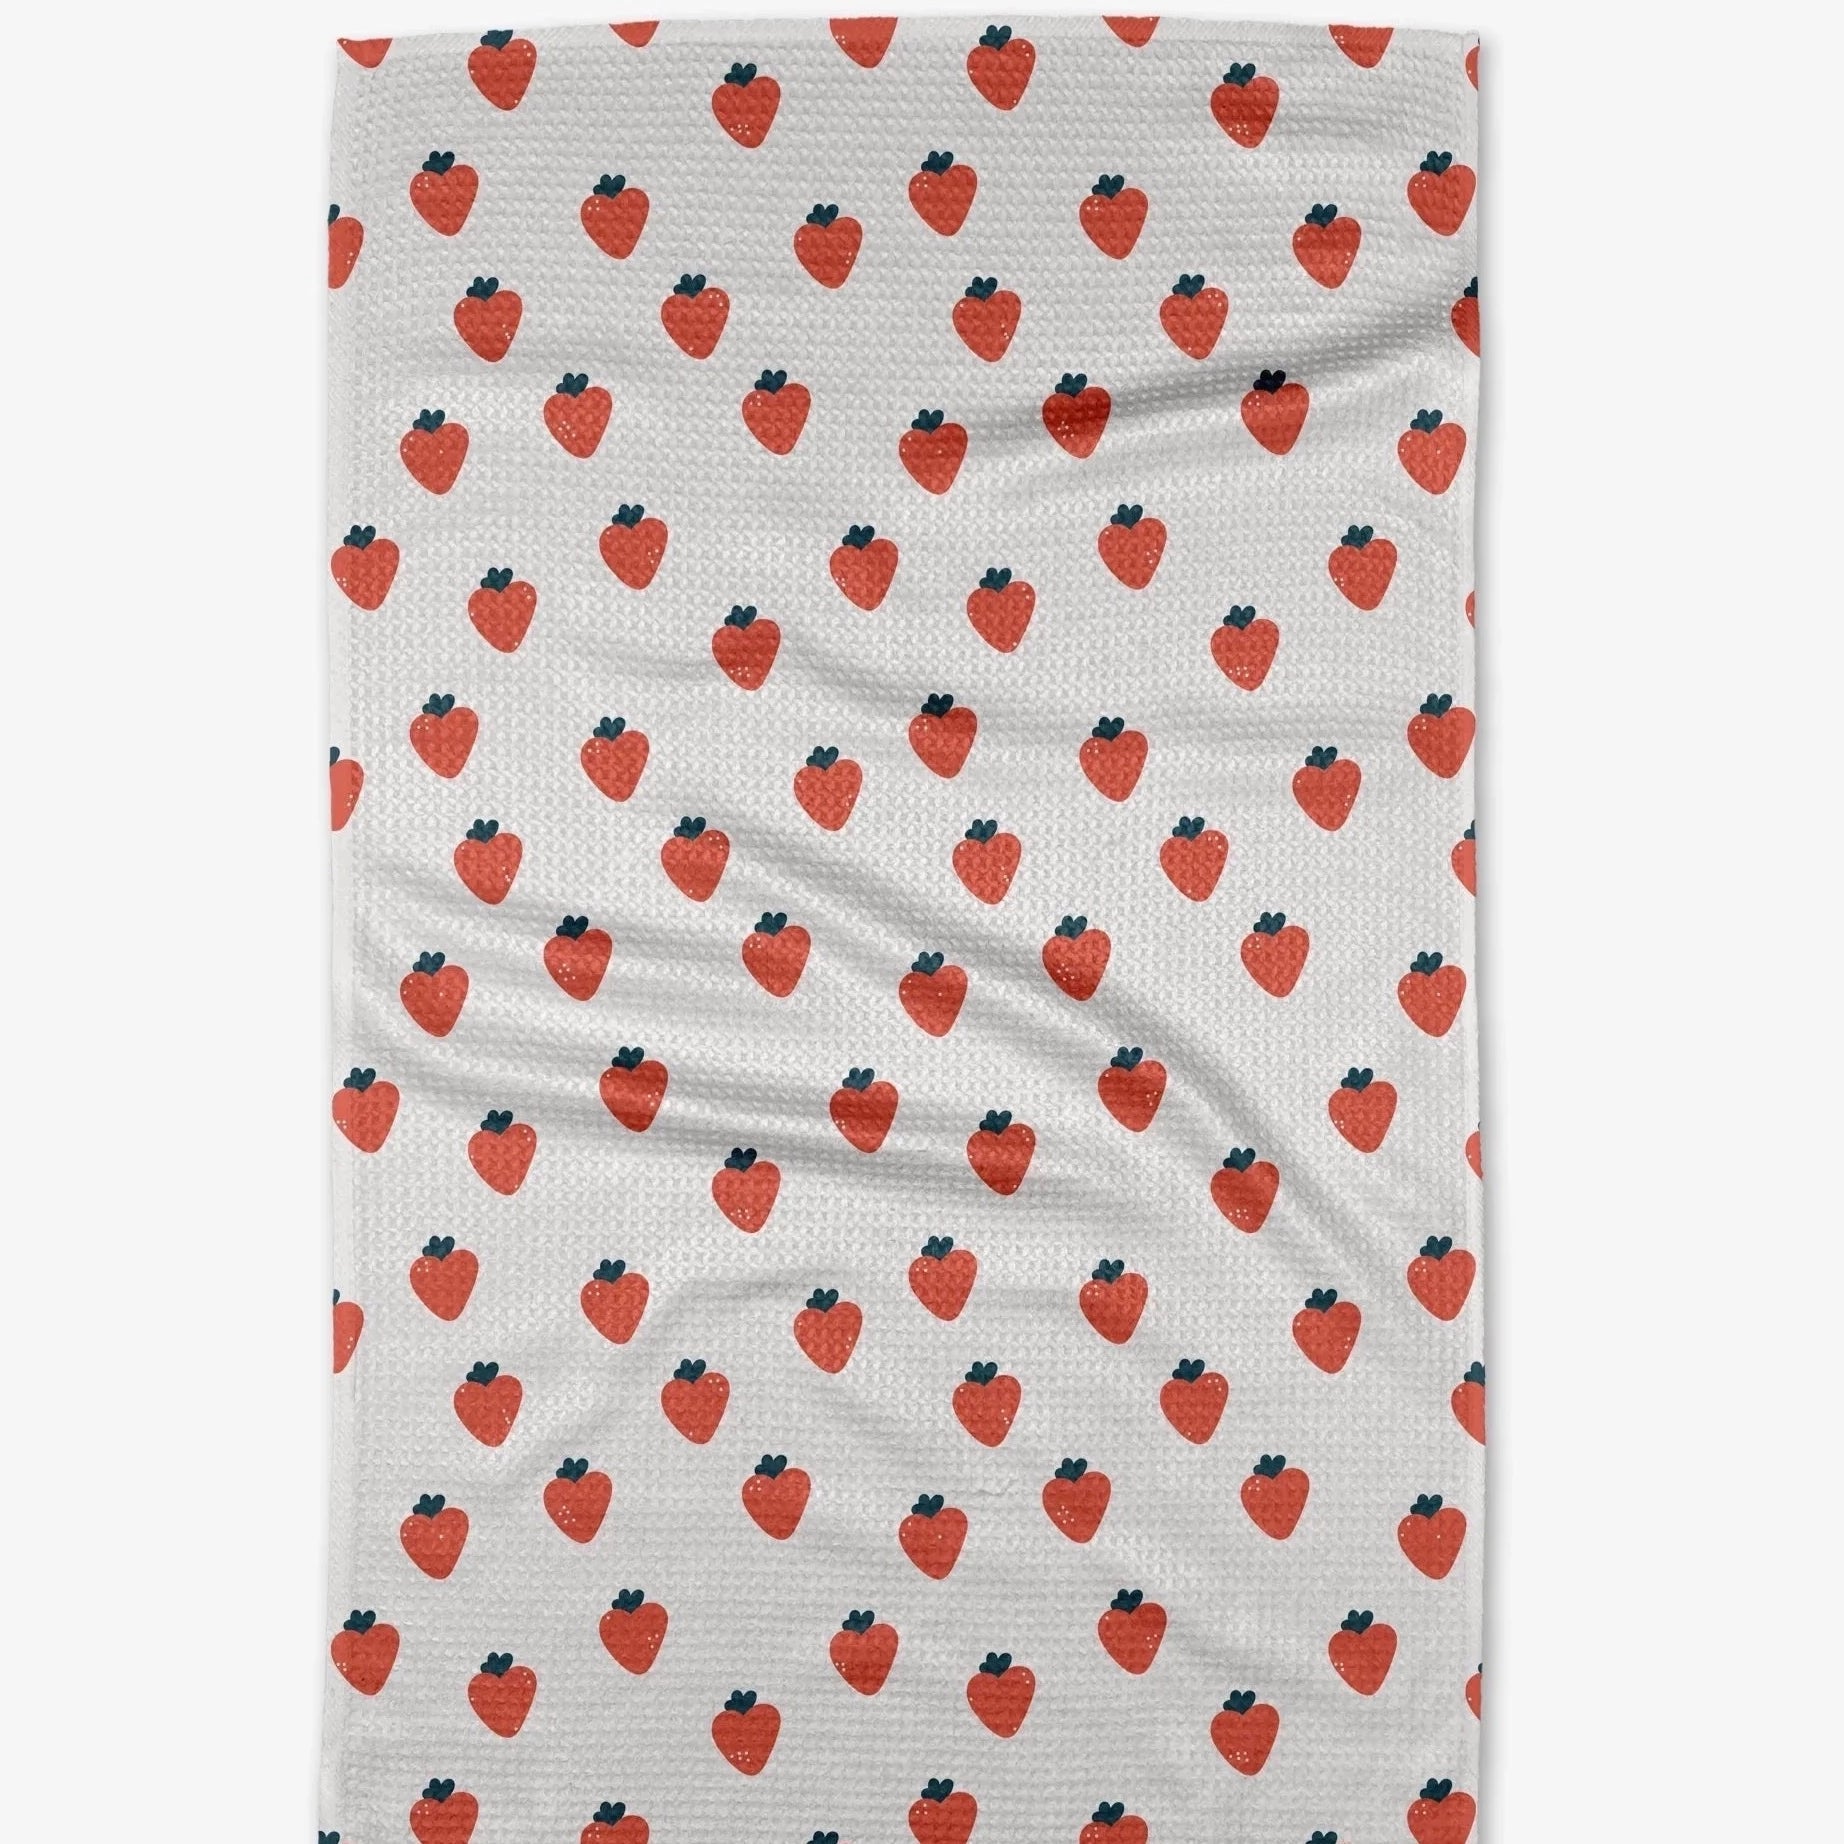 white tea towel with red strawberries printed on it